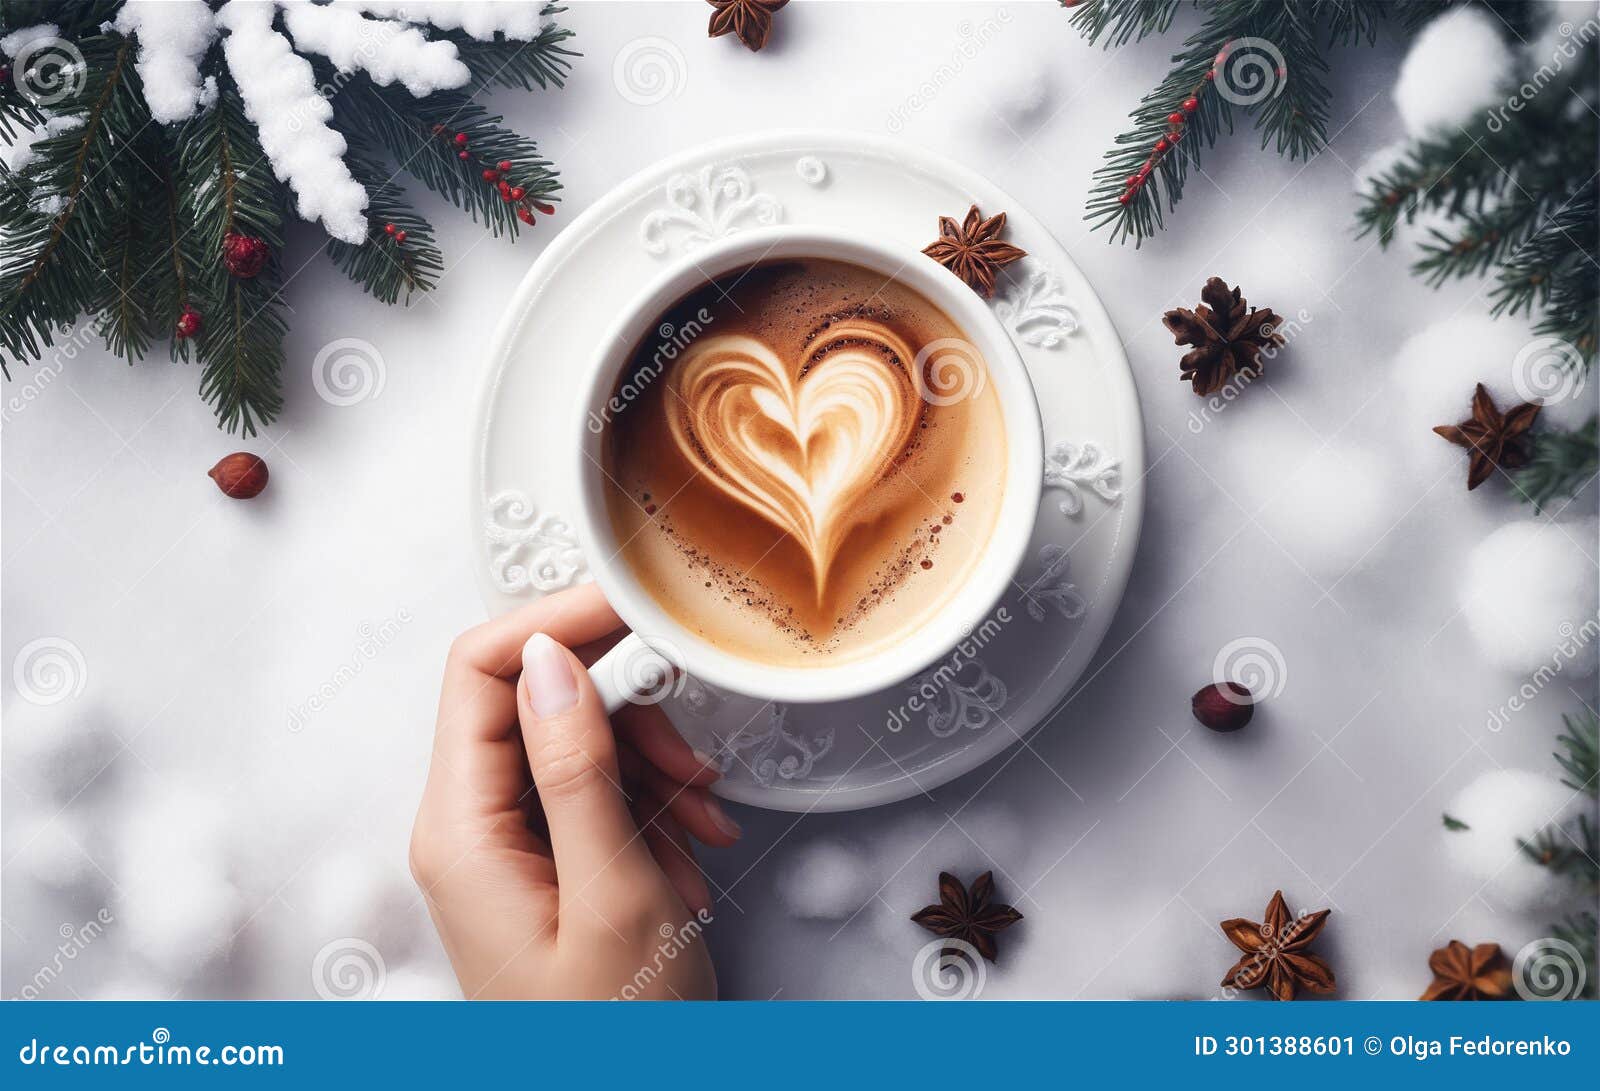 Latte Art at Christmas: how to decorate coffee and cappuccino with